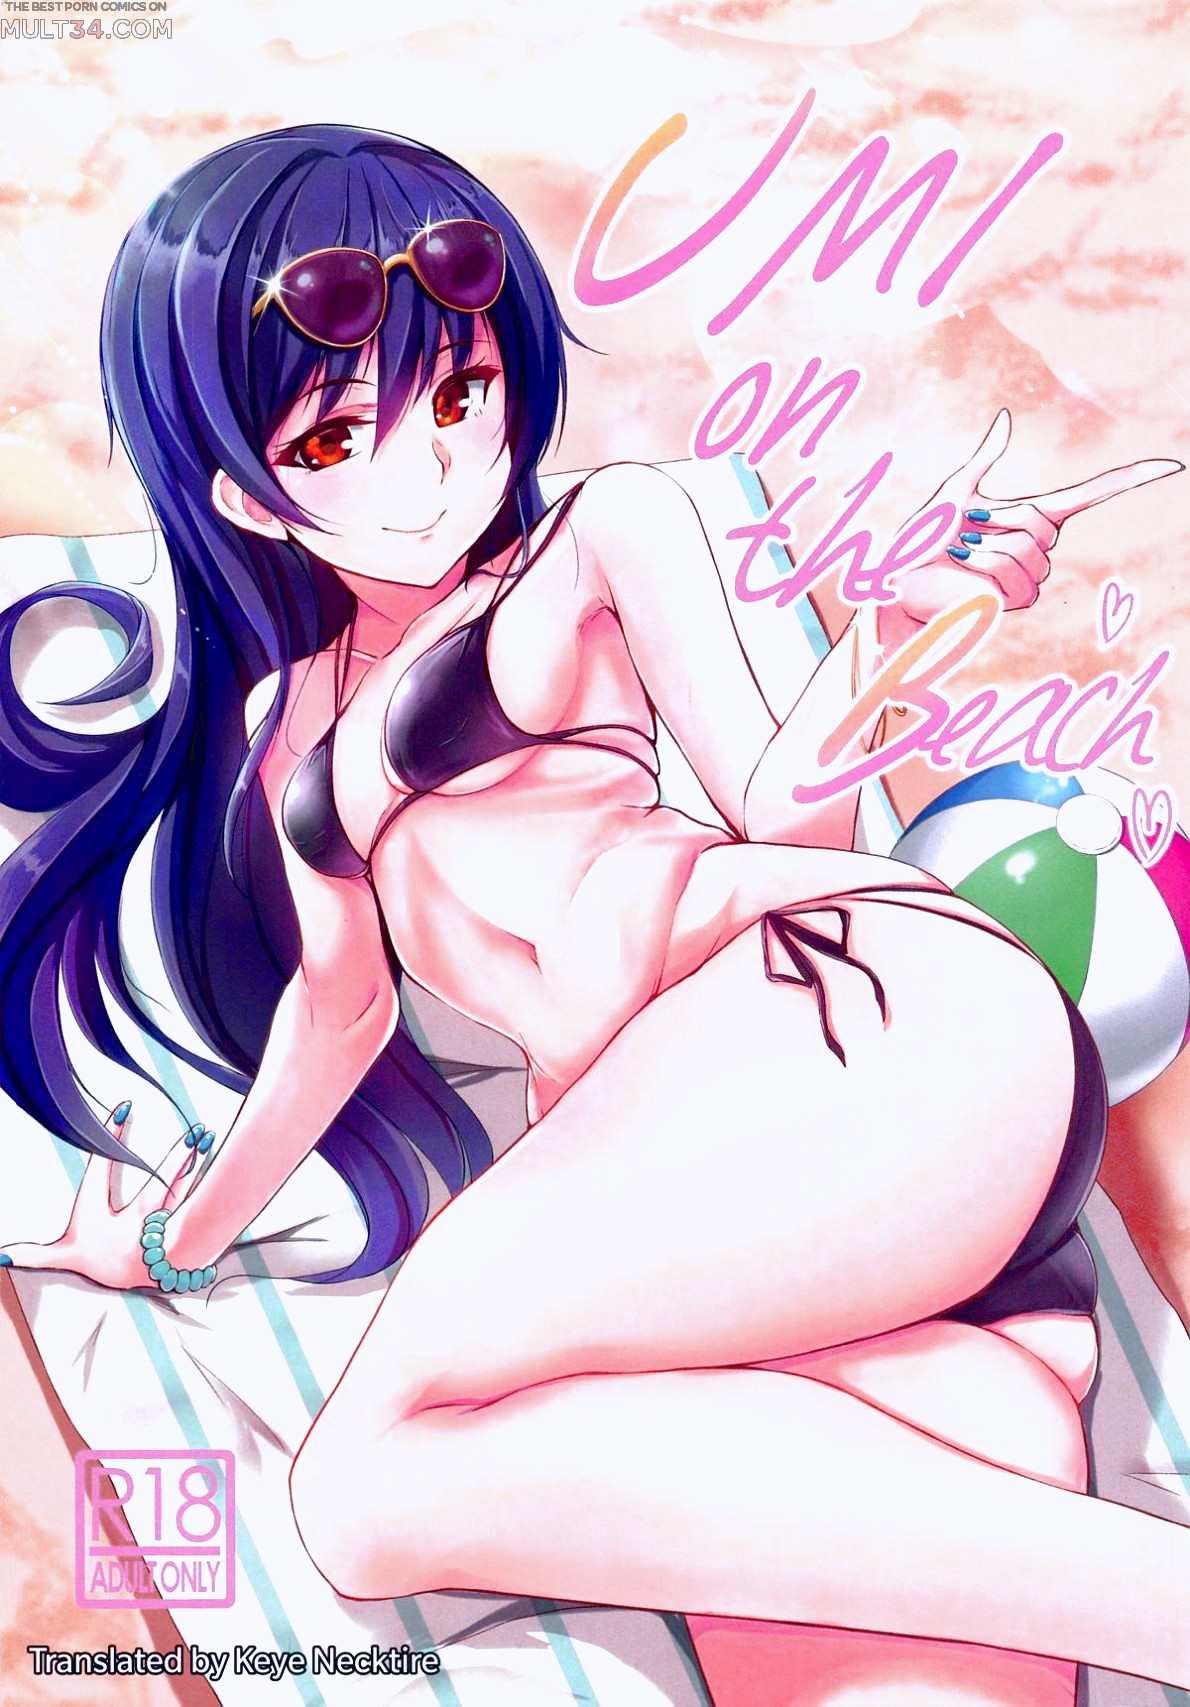 UMI on the Beach porn comic page 1 on category Love Live